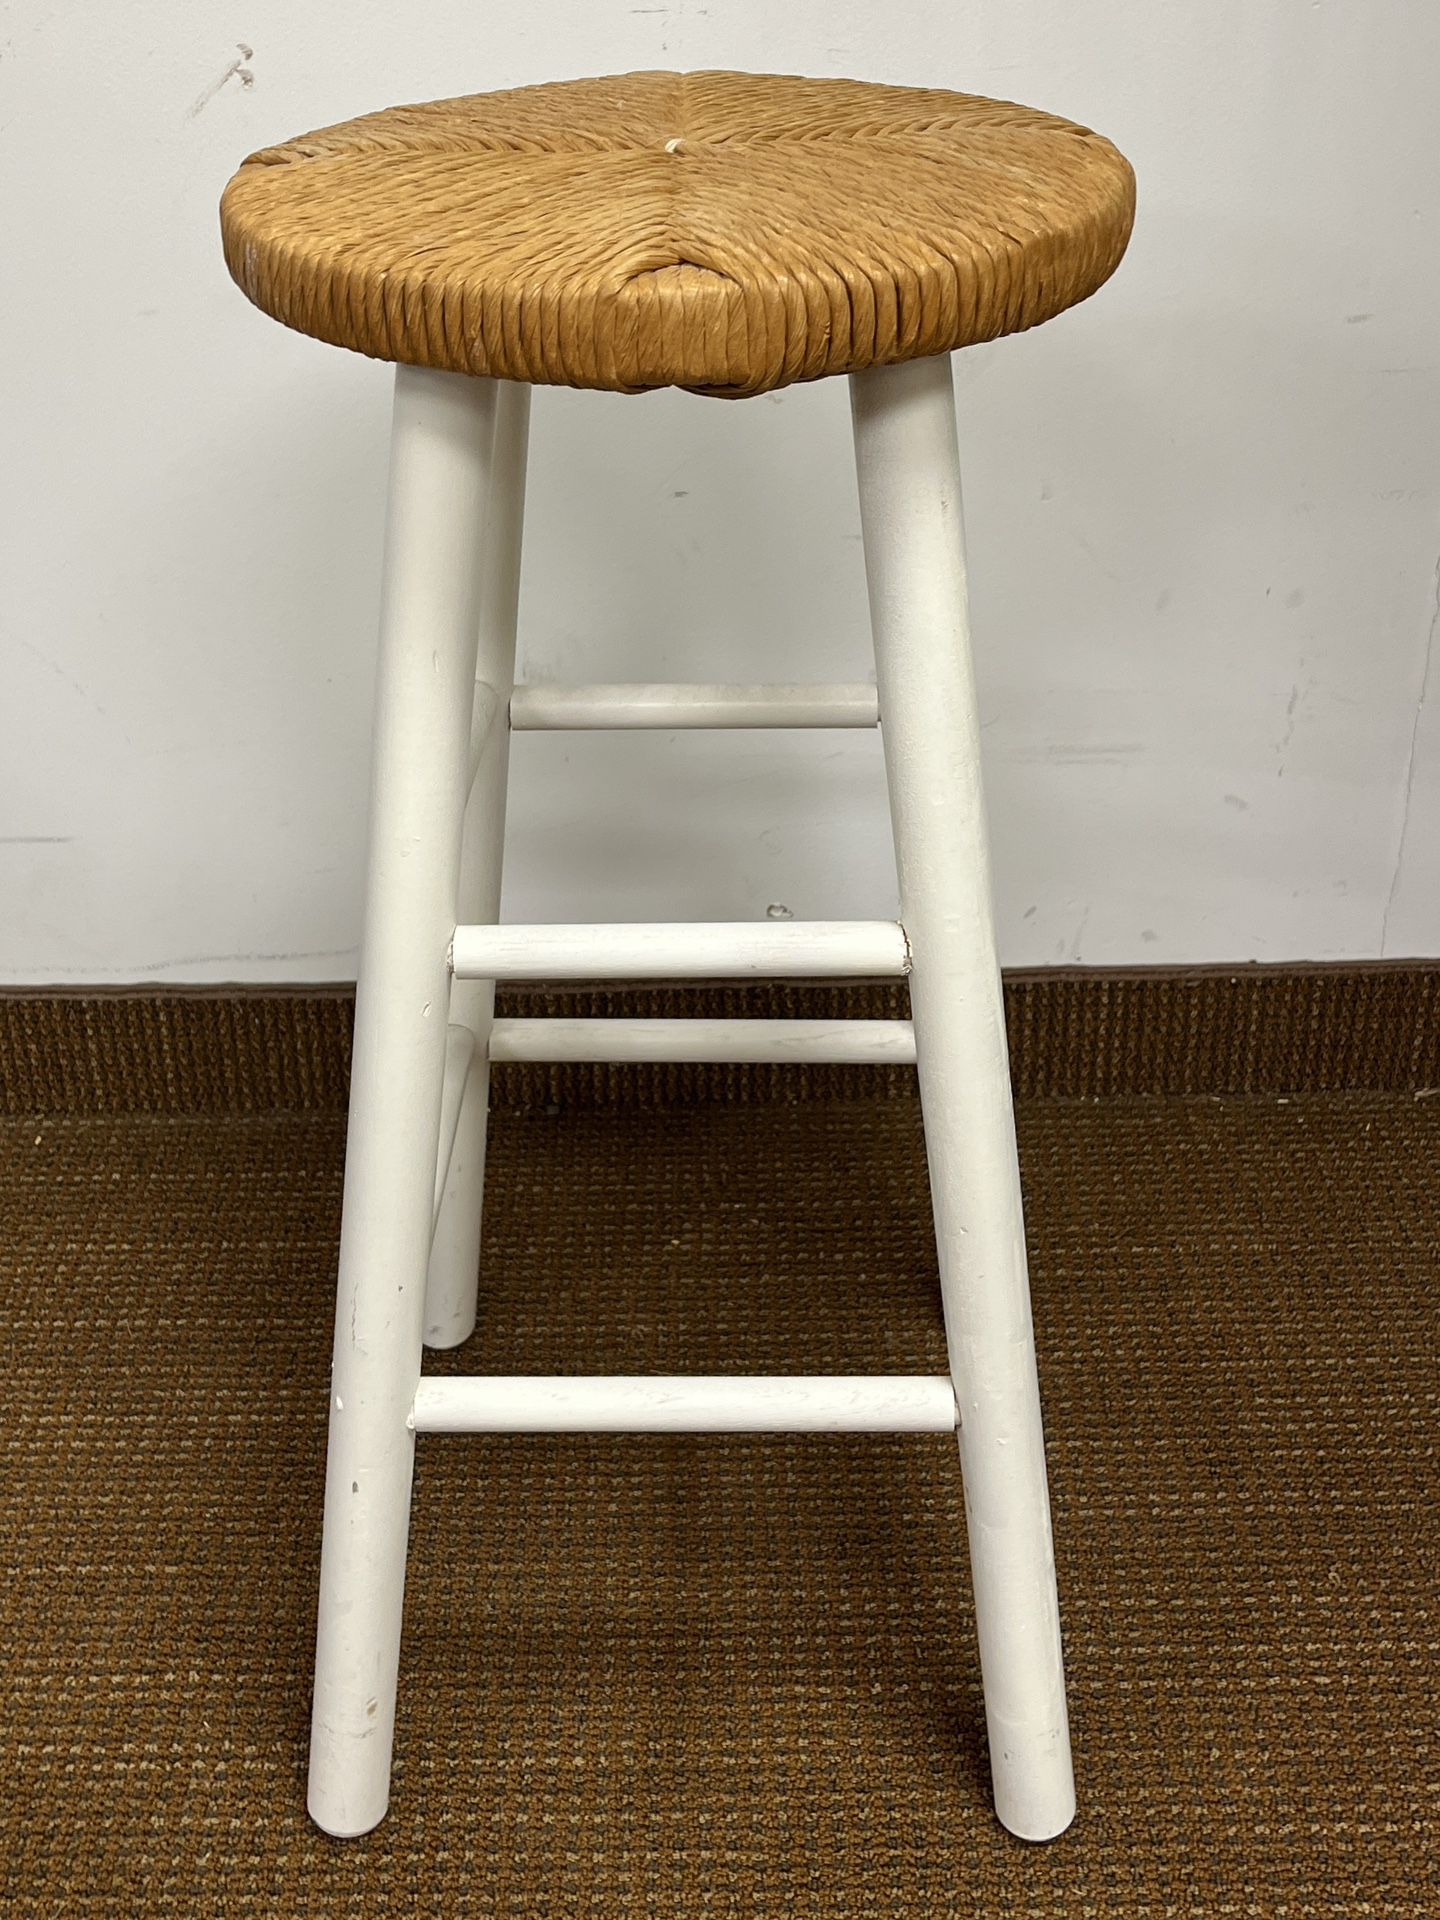 White Bar stool with Rush Seat. Good seat, legs have scuffs